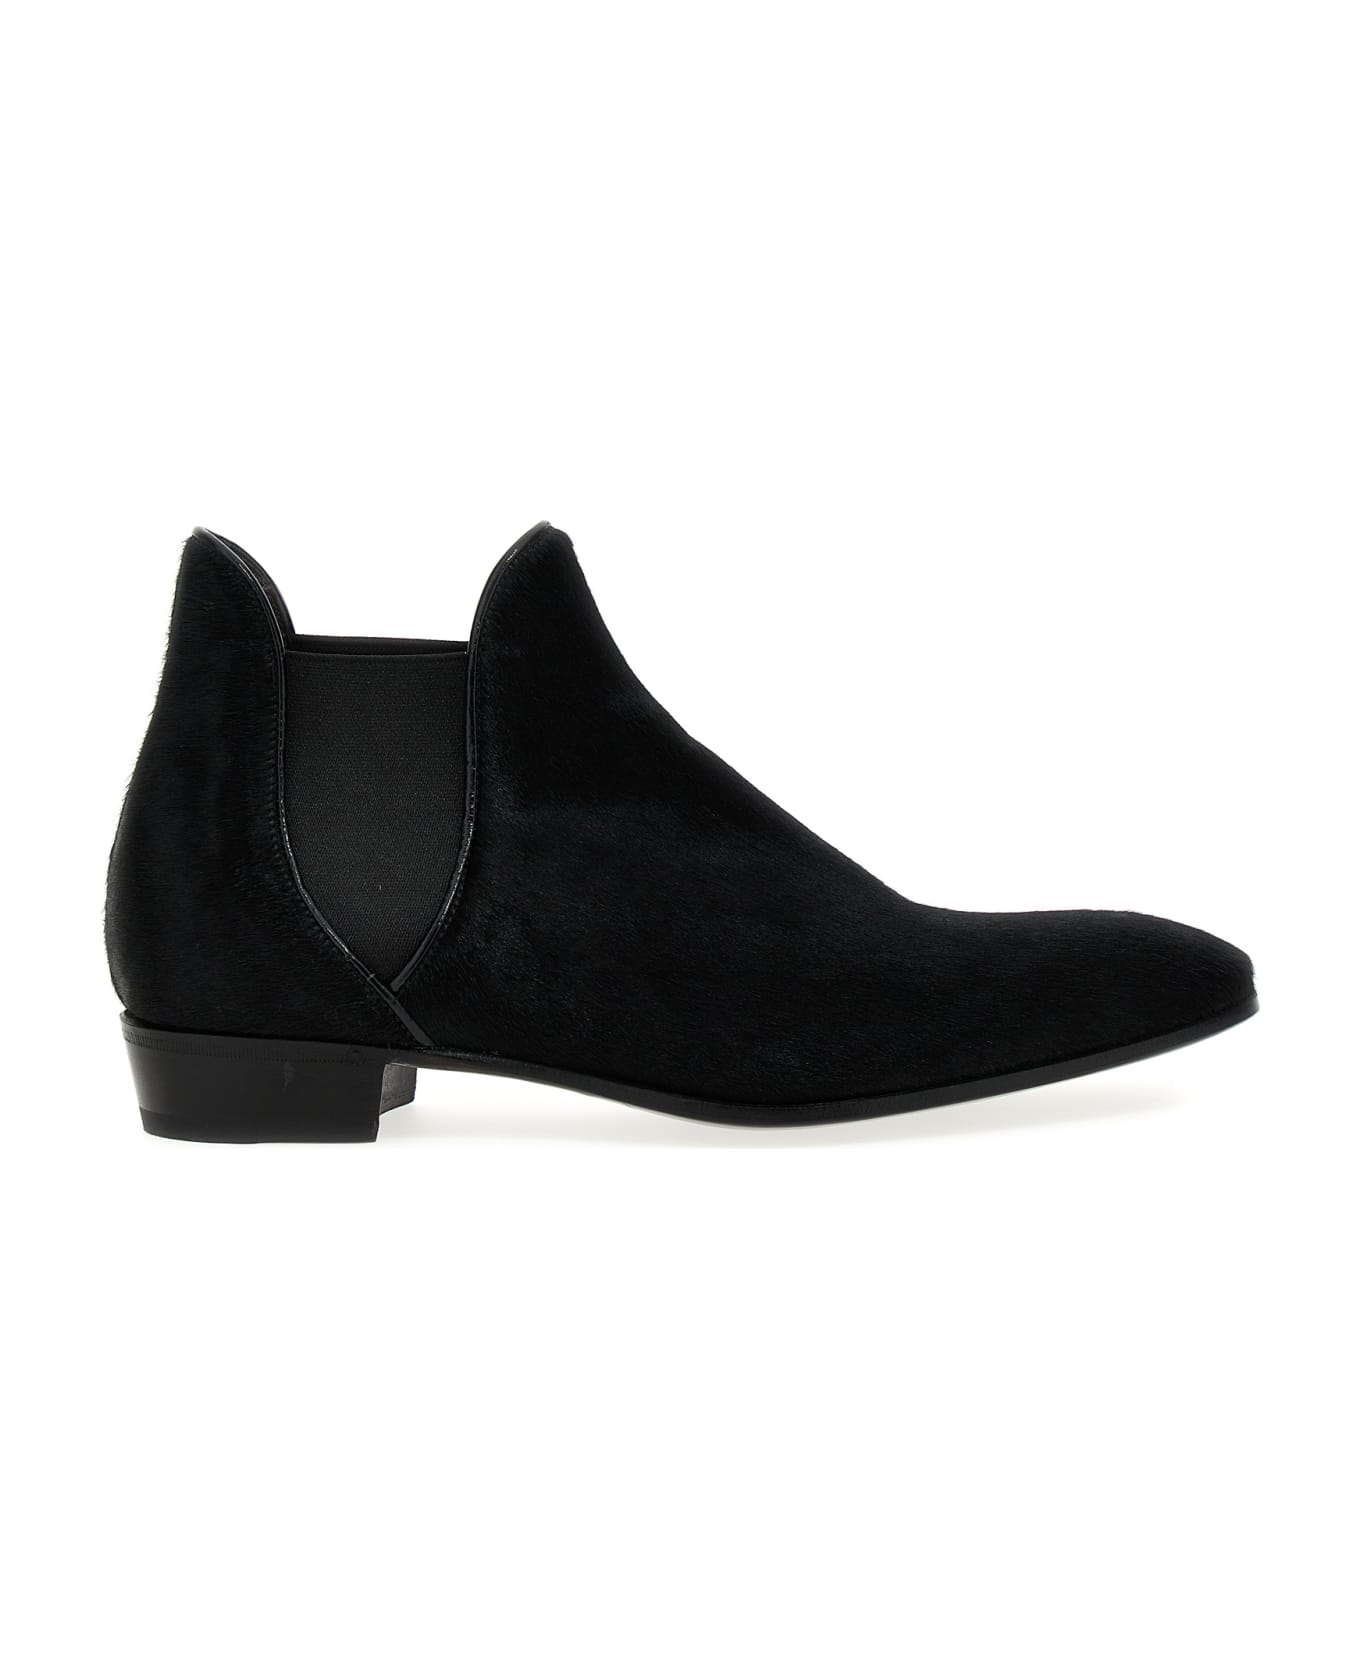 Lidfort Calf Hair Ankle Boots - Black  